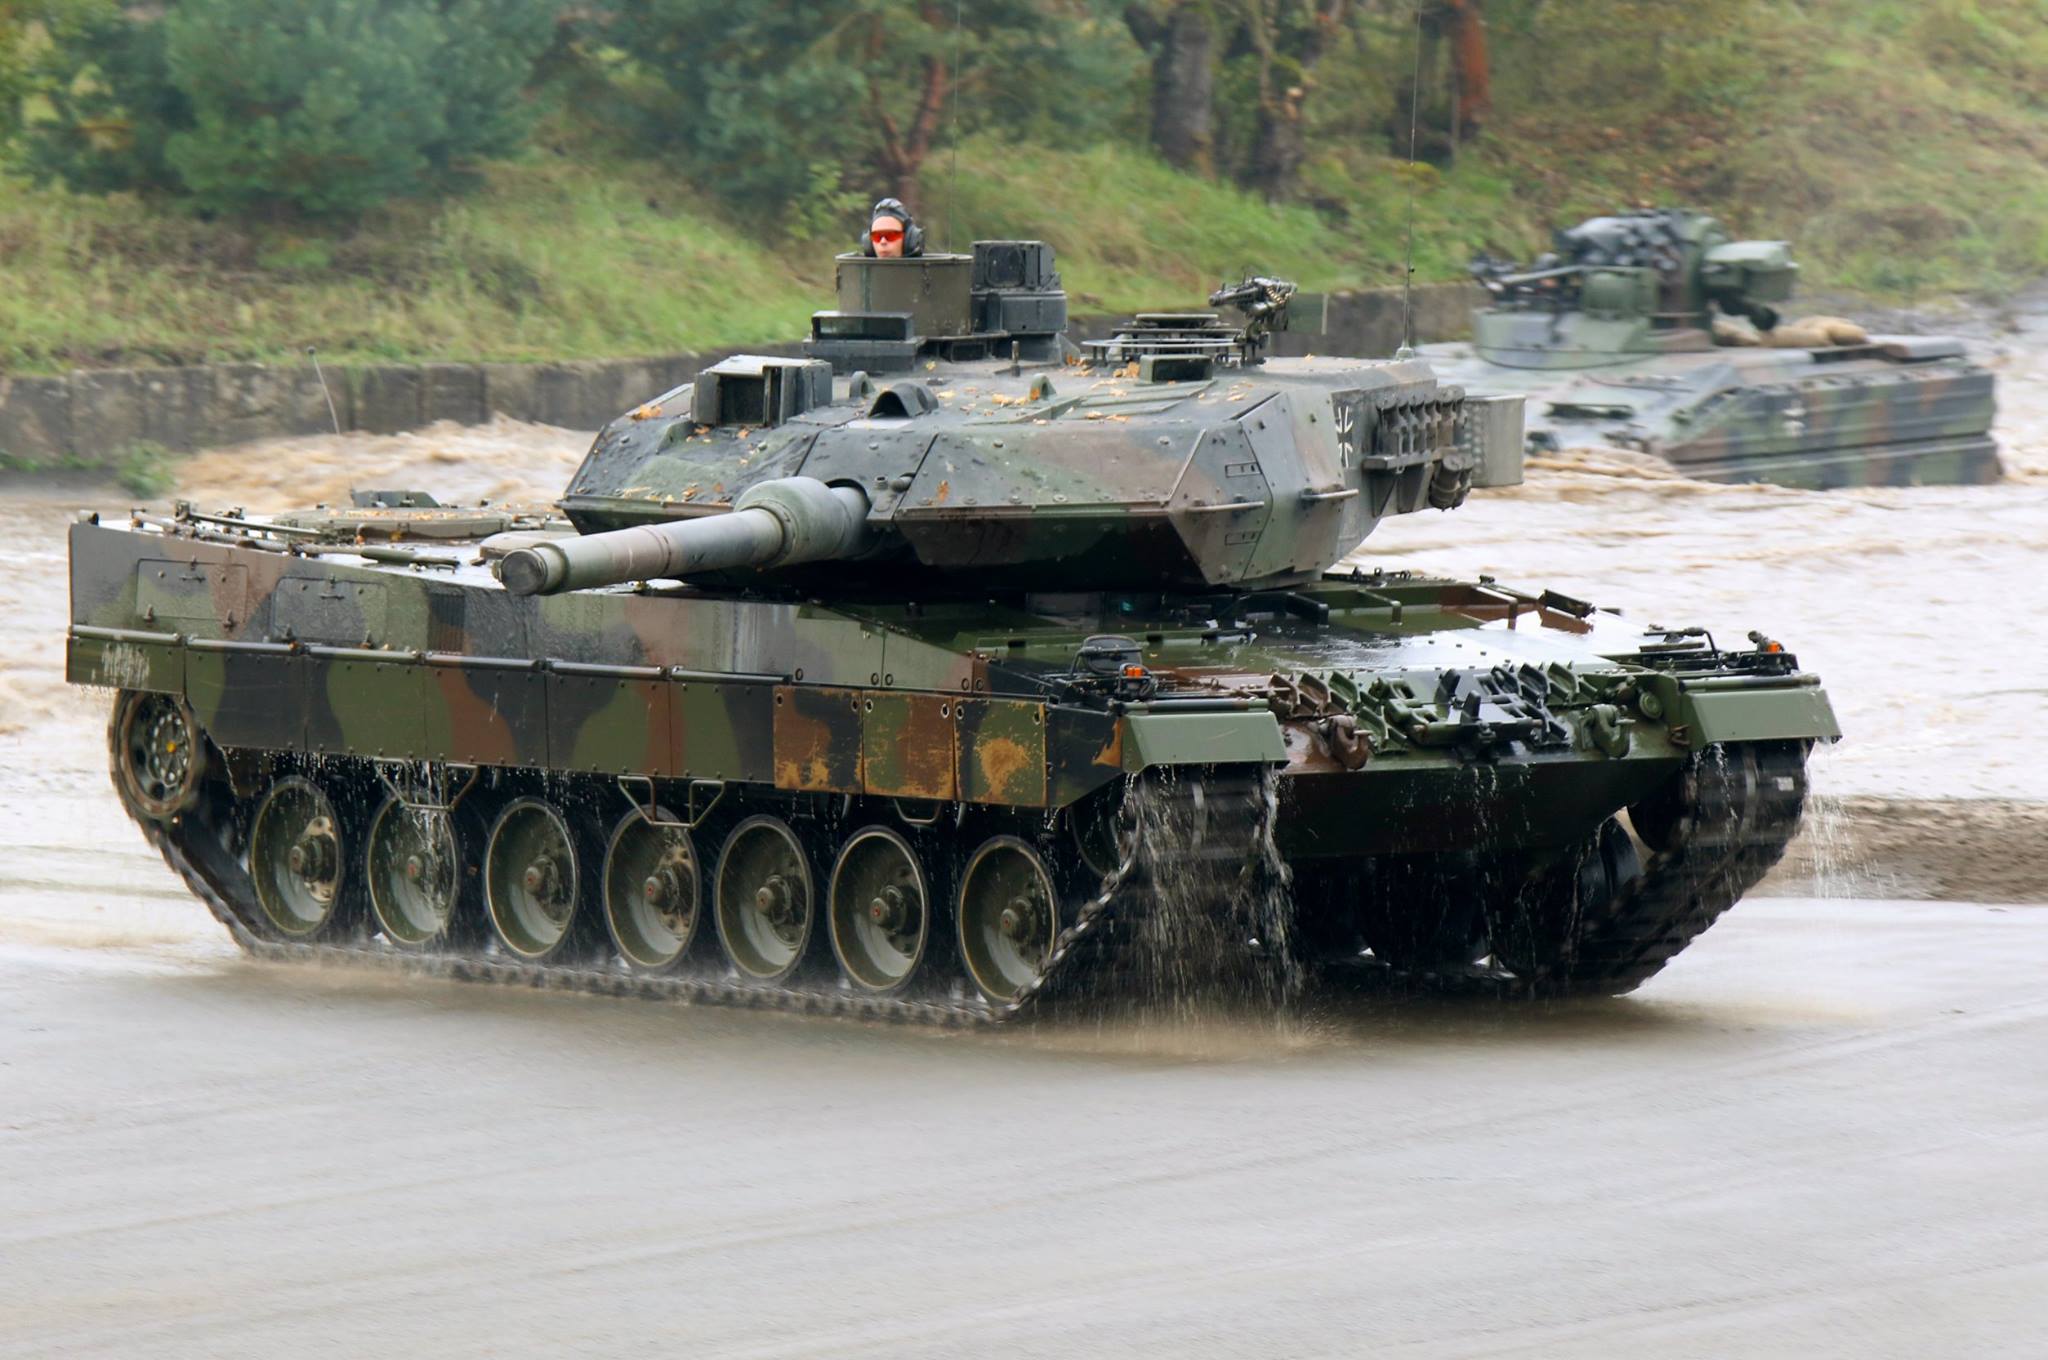 More than half of the German's Leopard 2 main battle tanks are unfit for  service